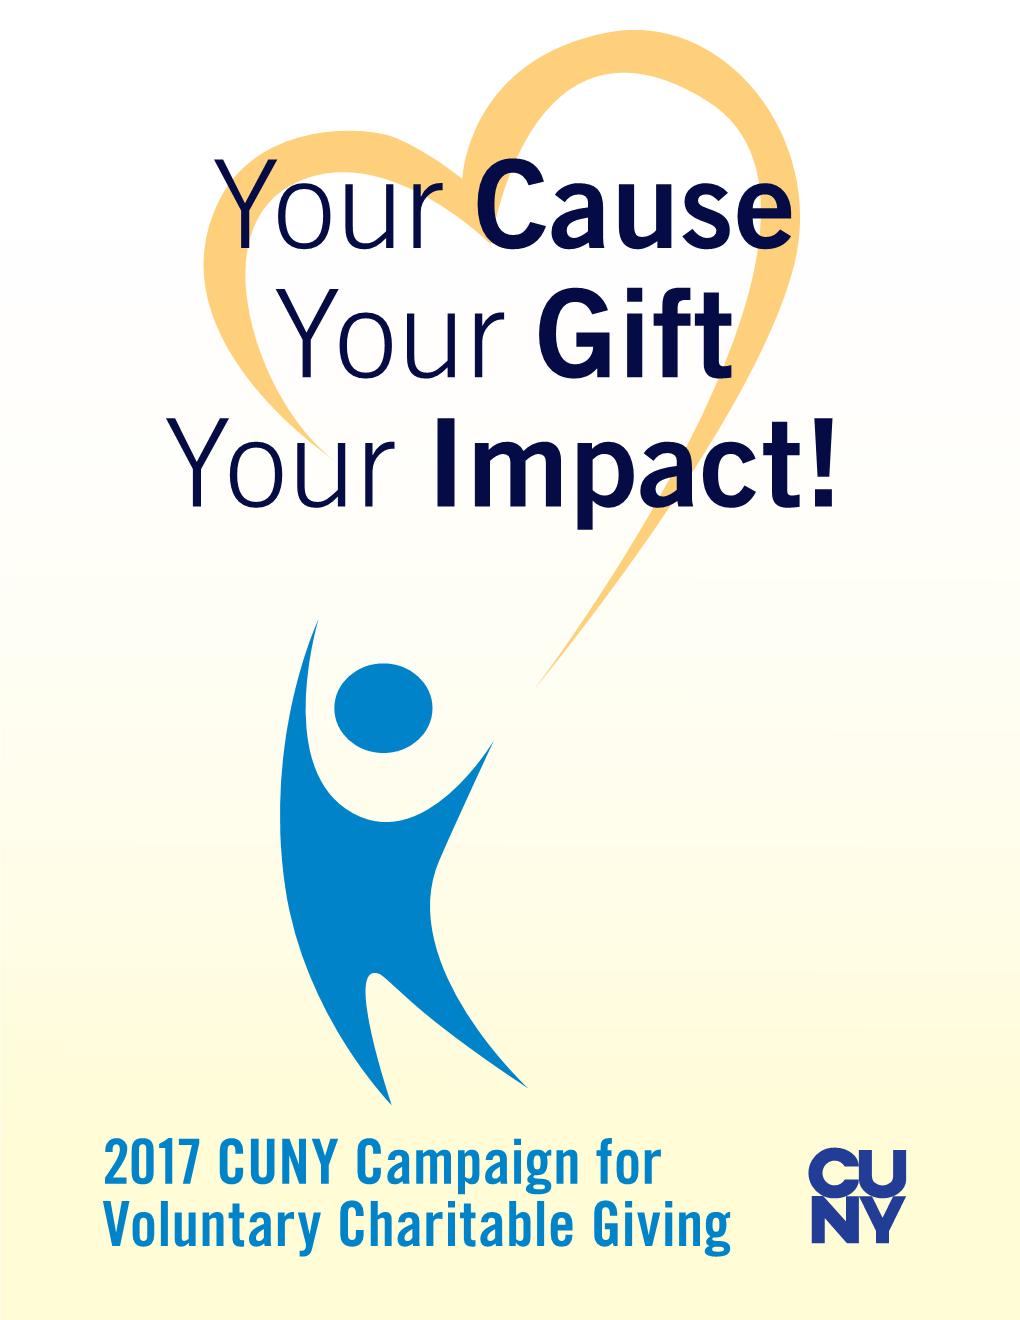 2017 CUNY Campaign for Voluntary Charitable Giving